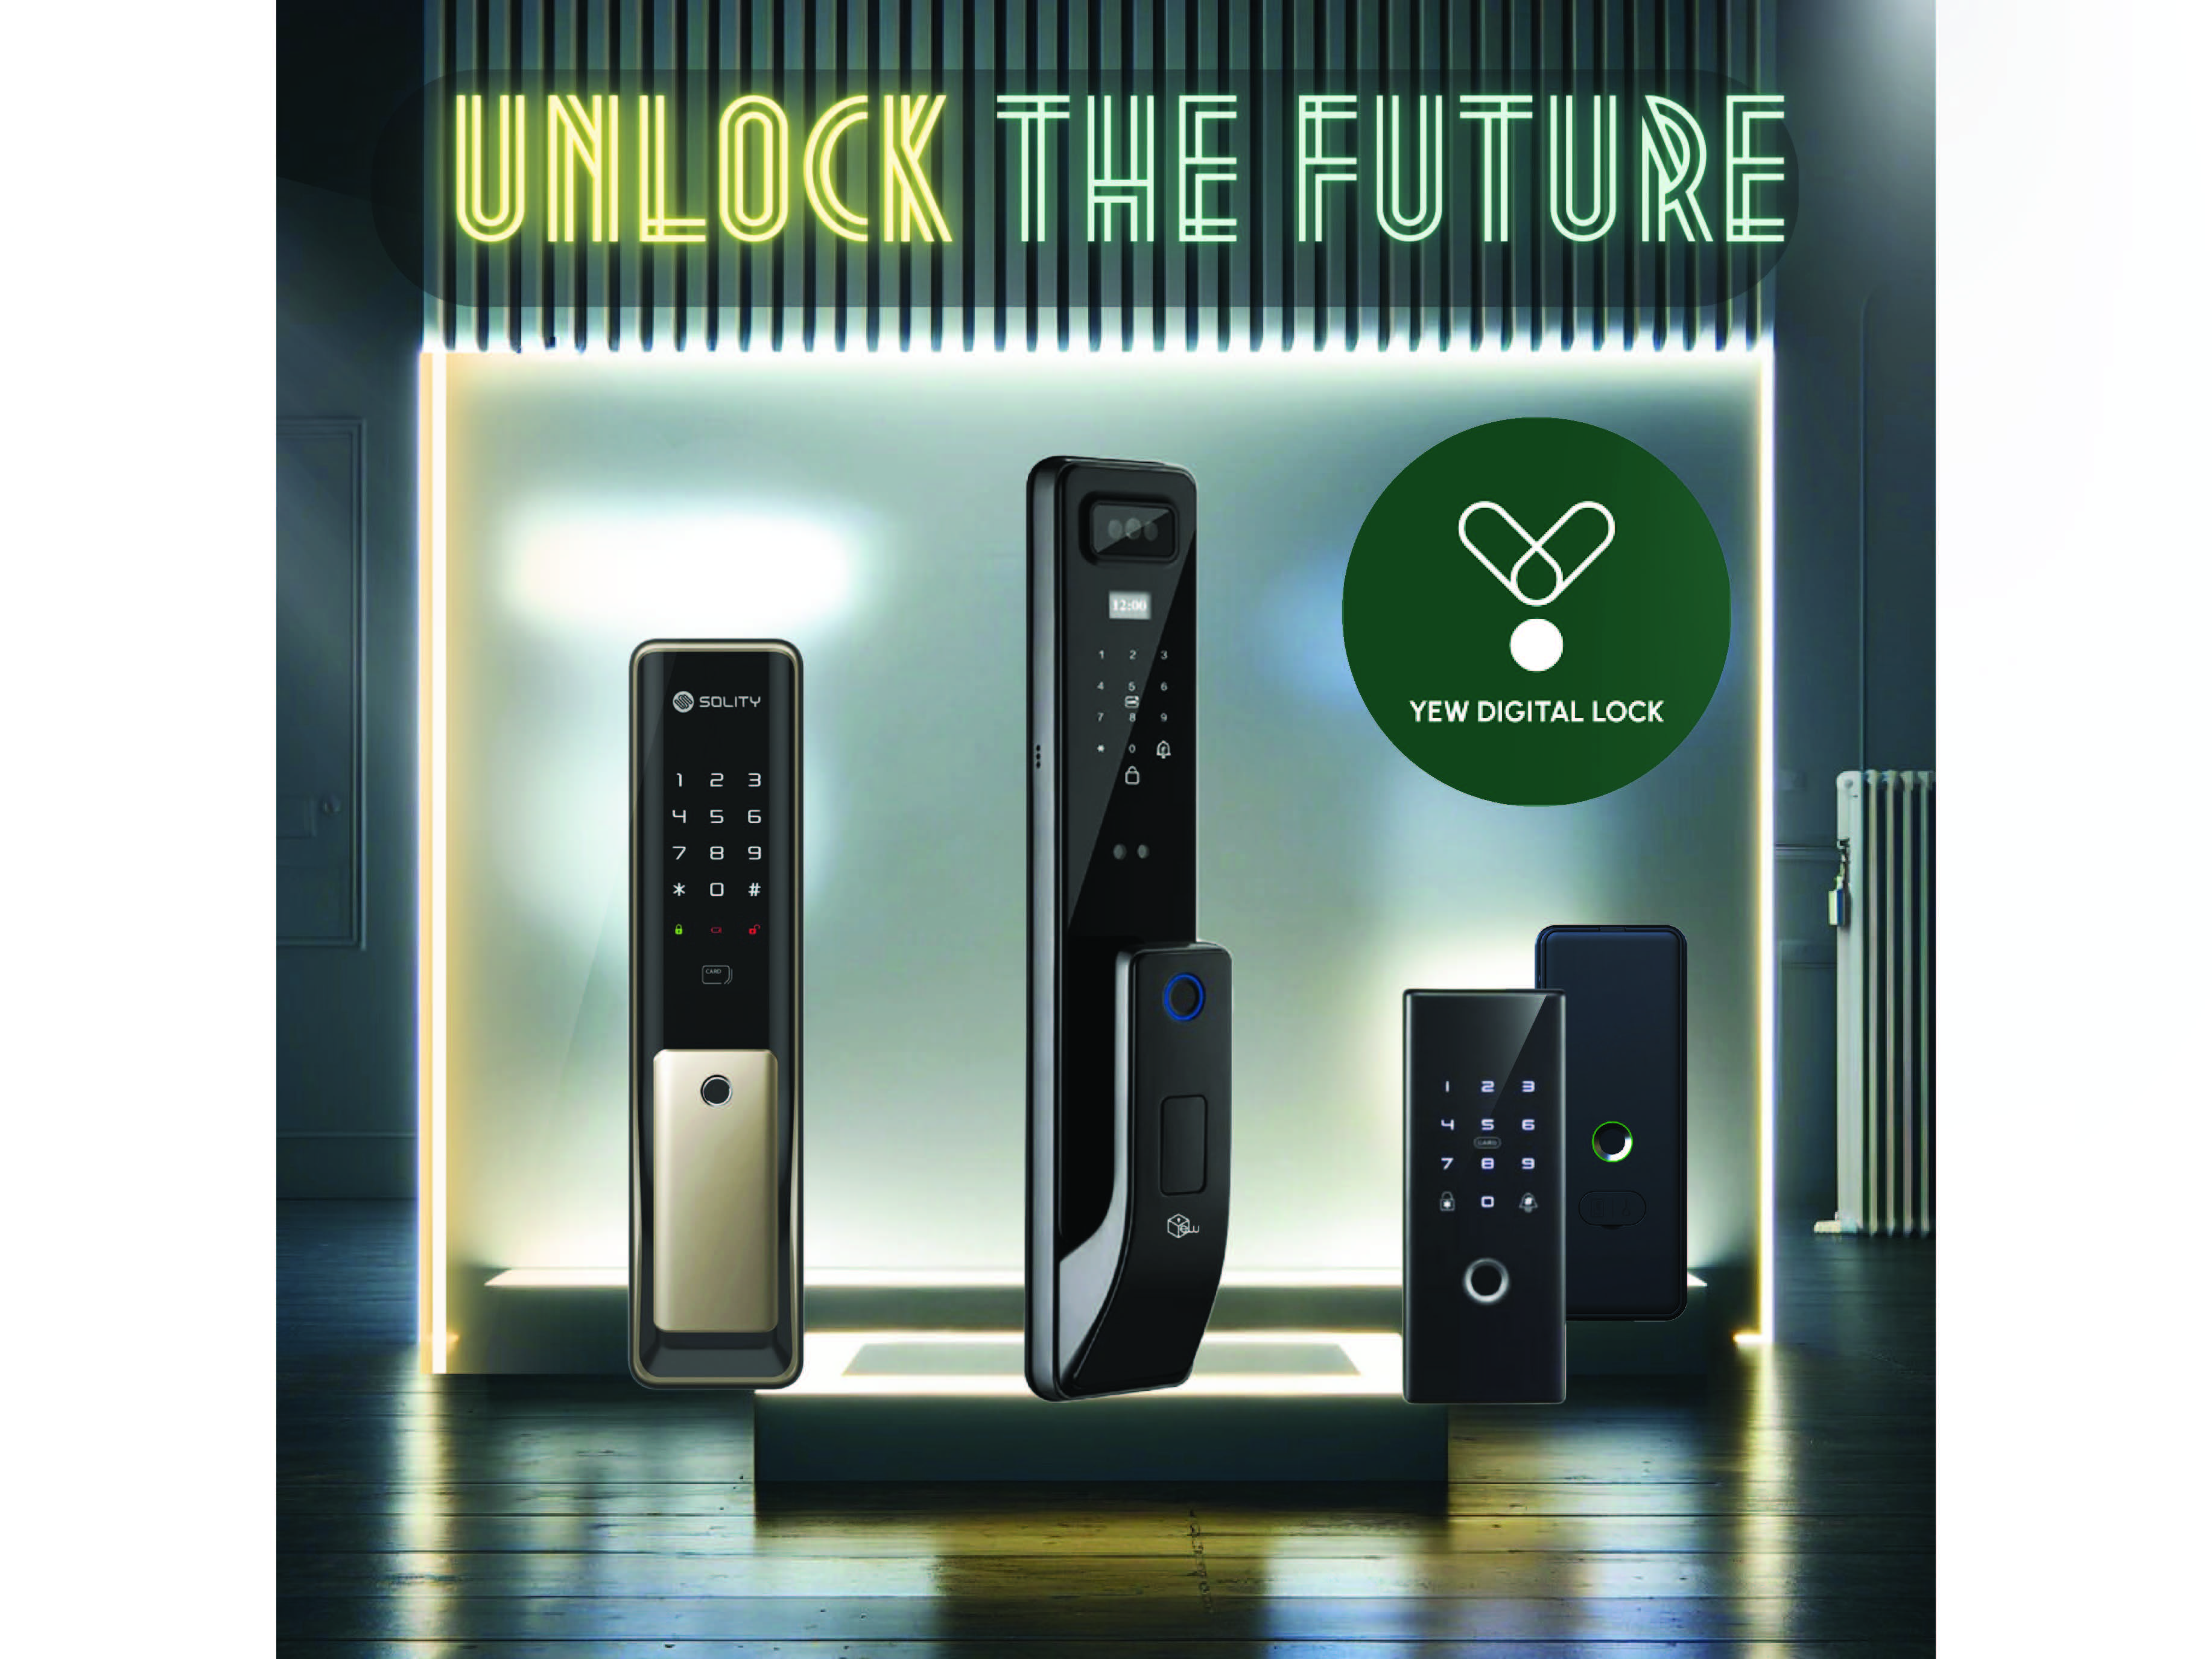 Yew Digital Lock Becomes Sole Authorized Dealer for Solity in Singapore.